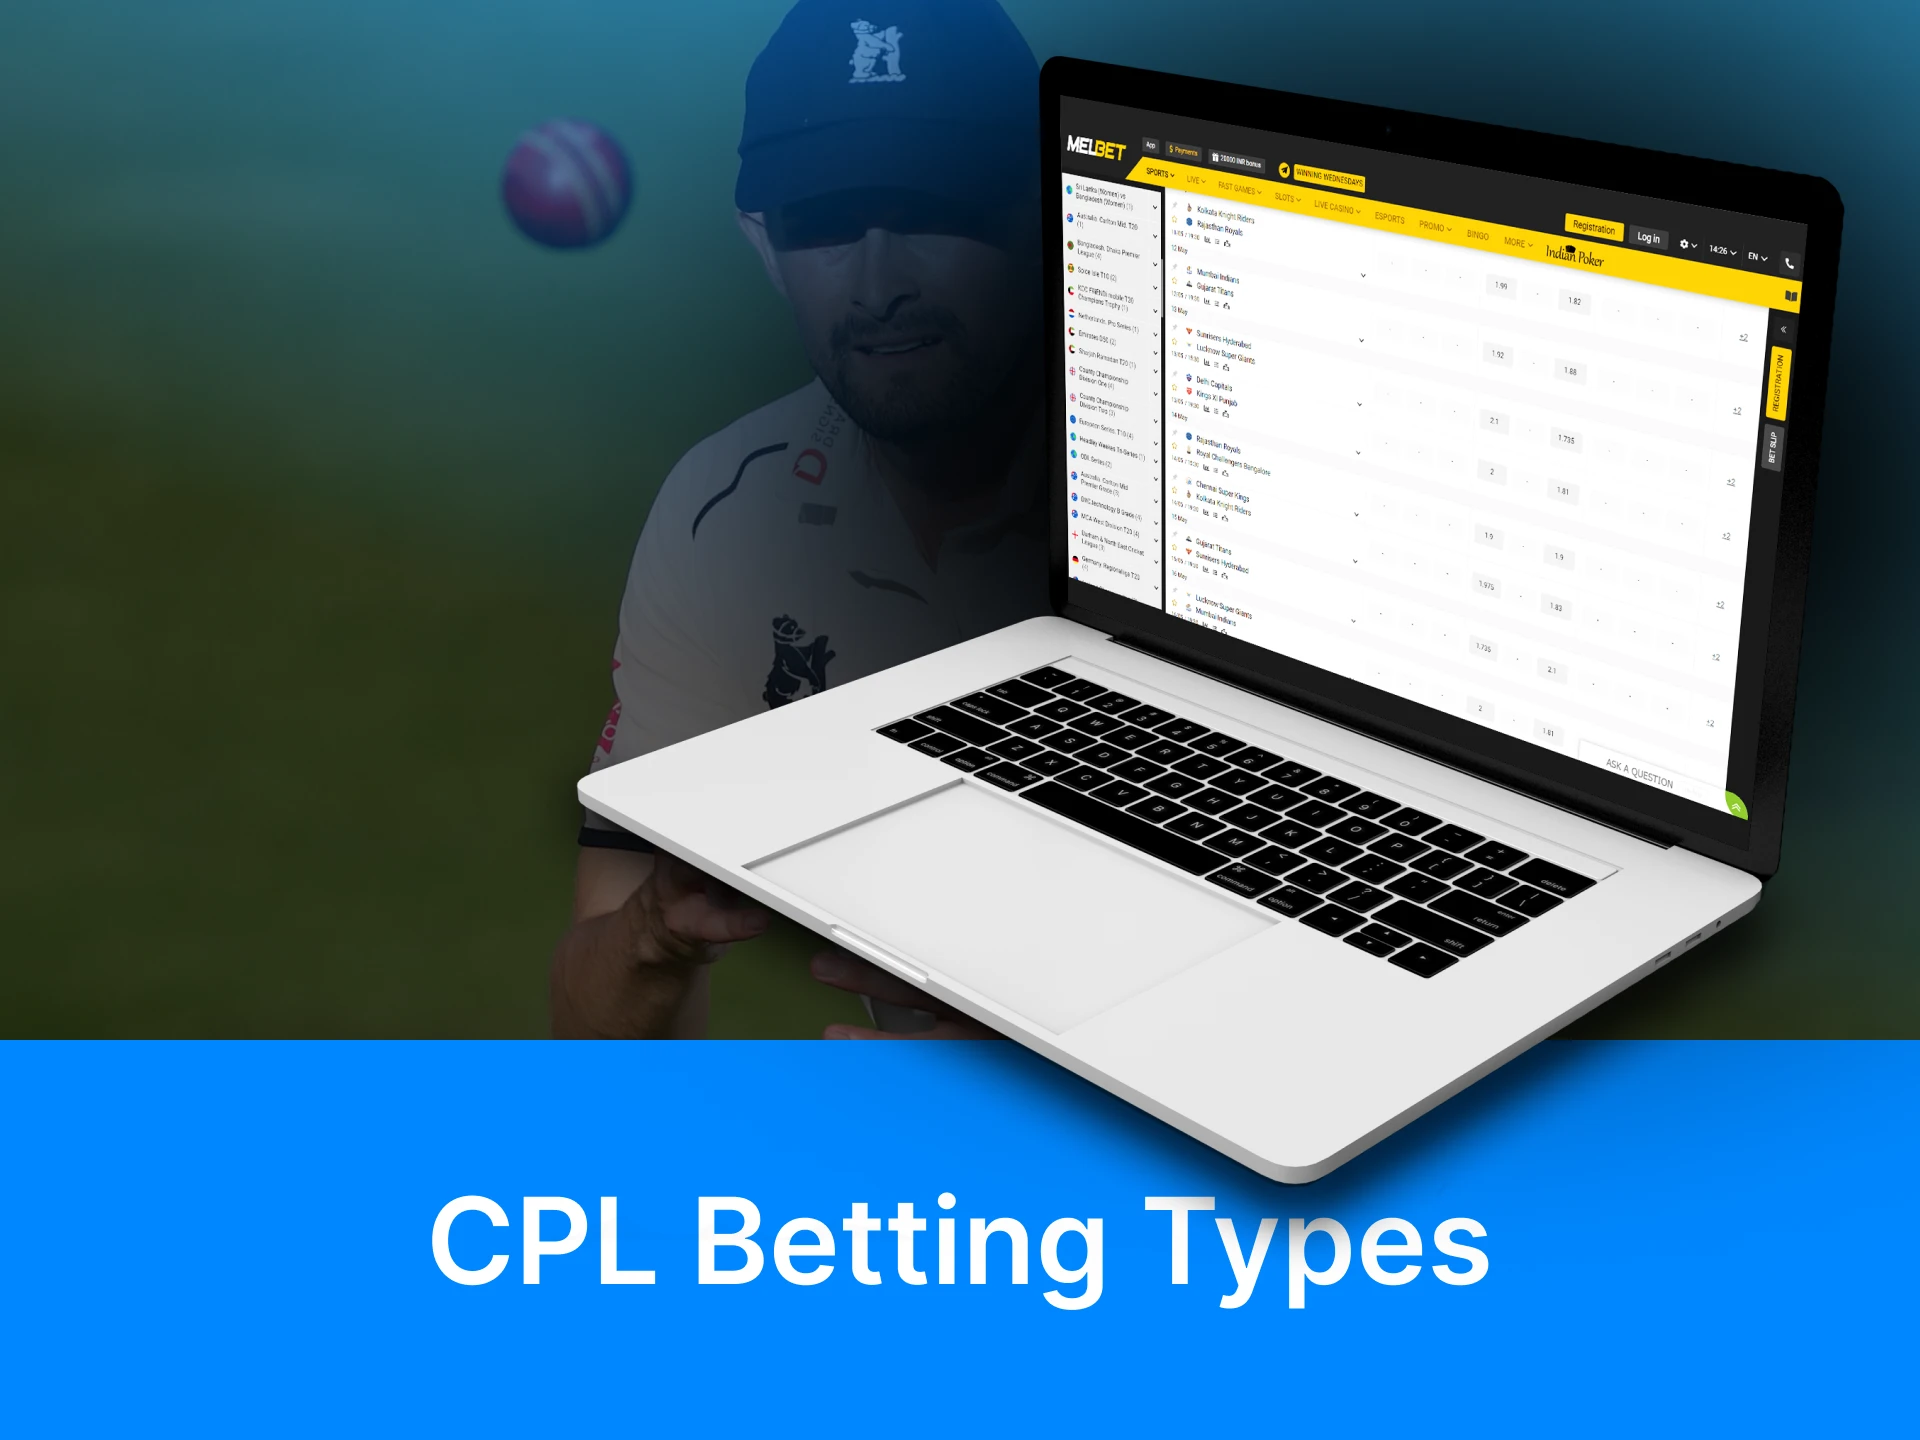 You can place different types of bets for CPL on the bookmakers' sites.